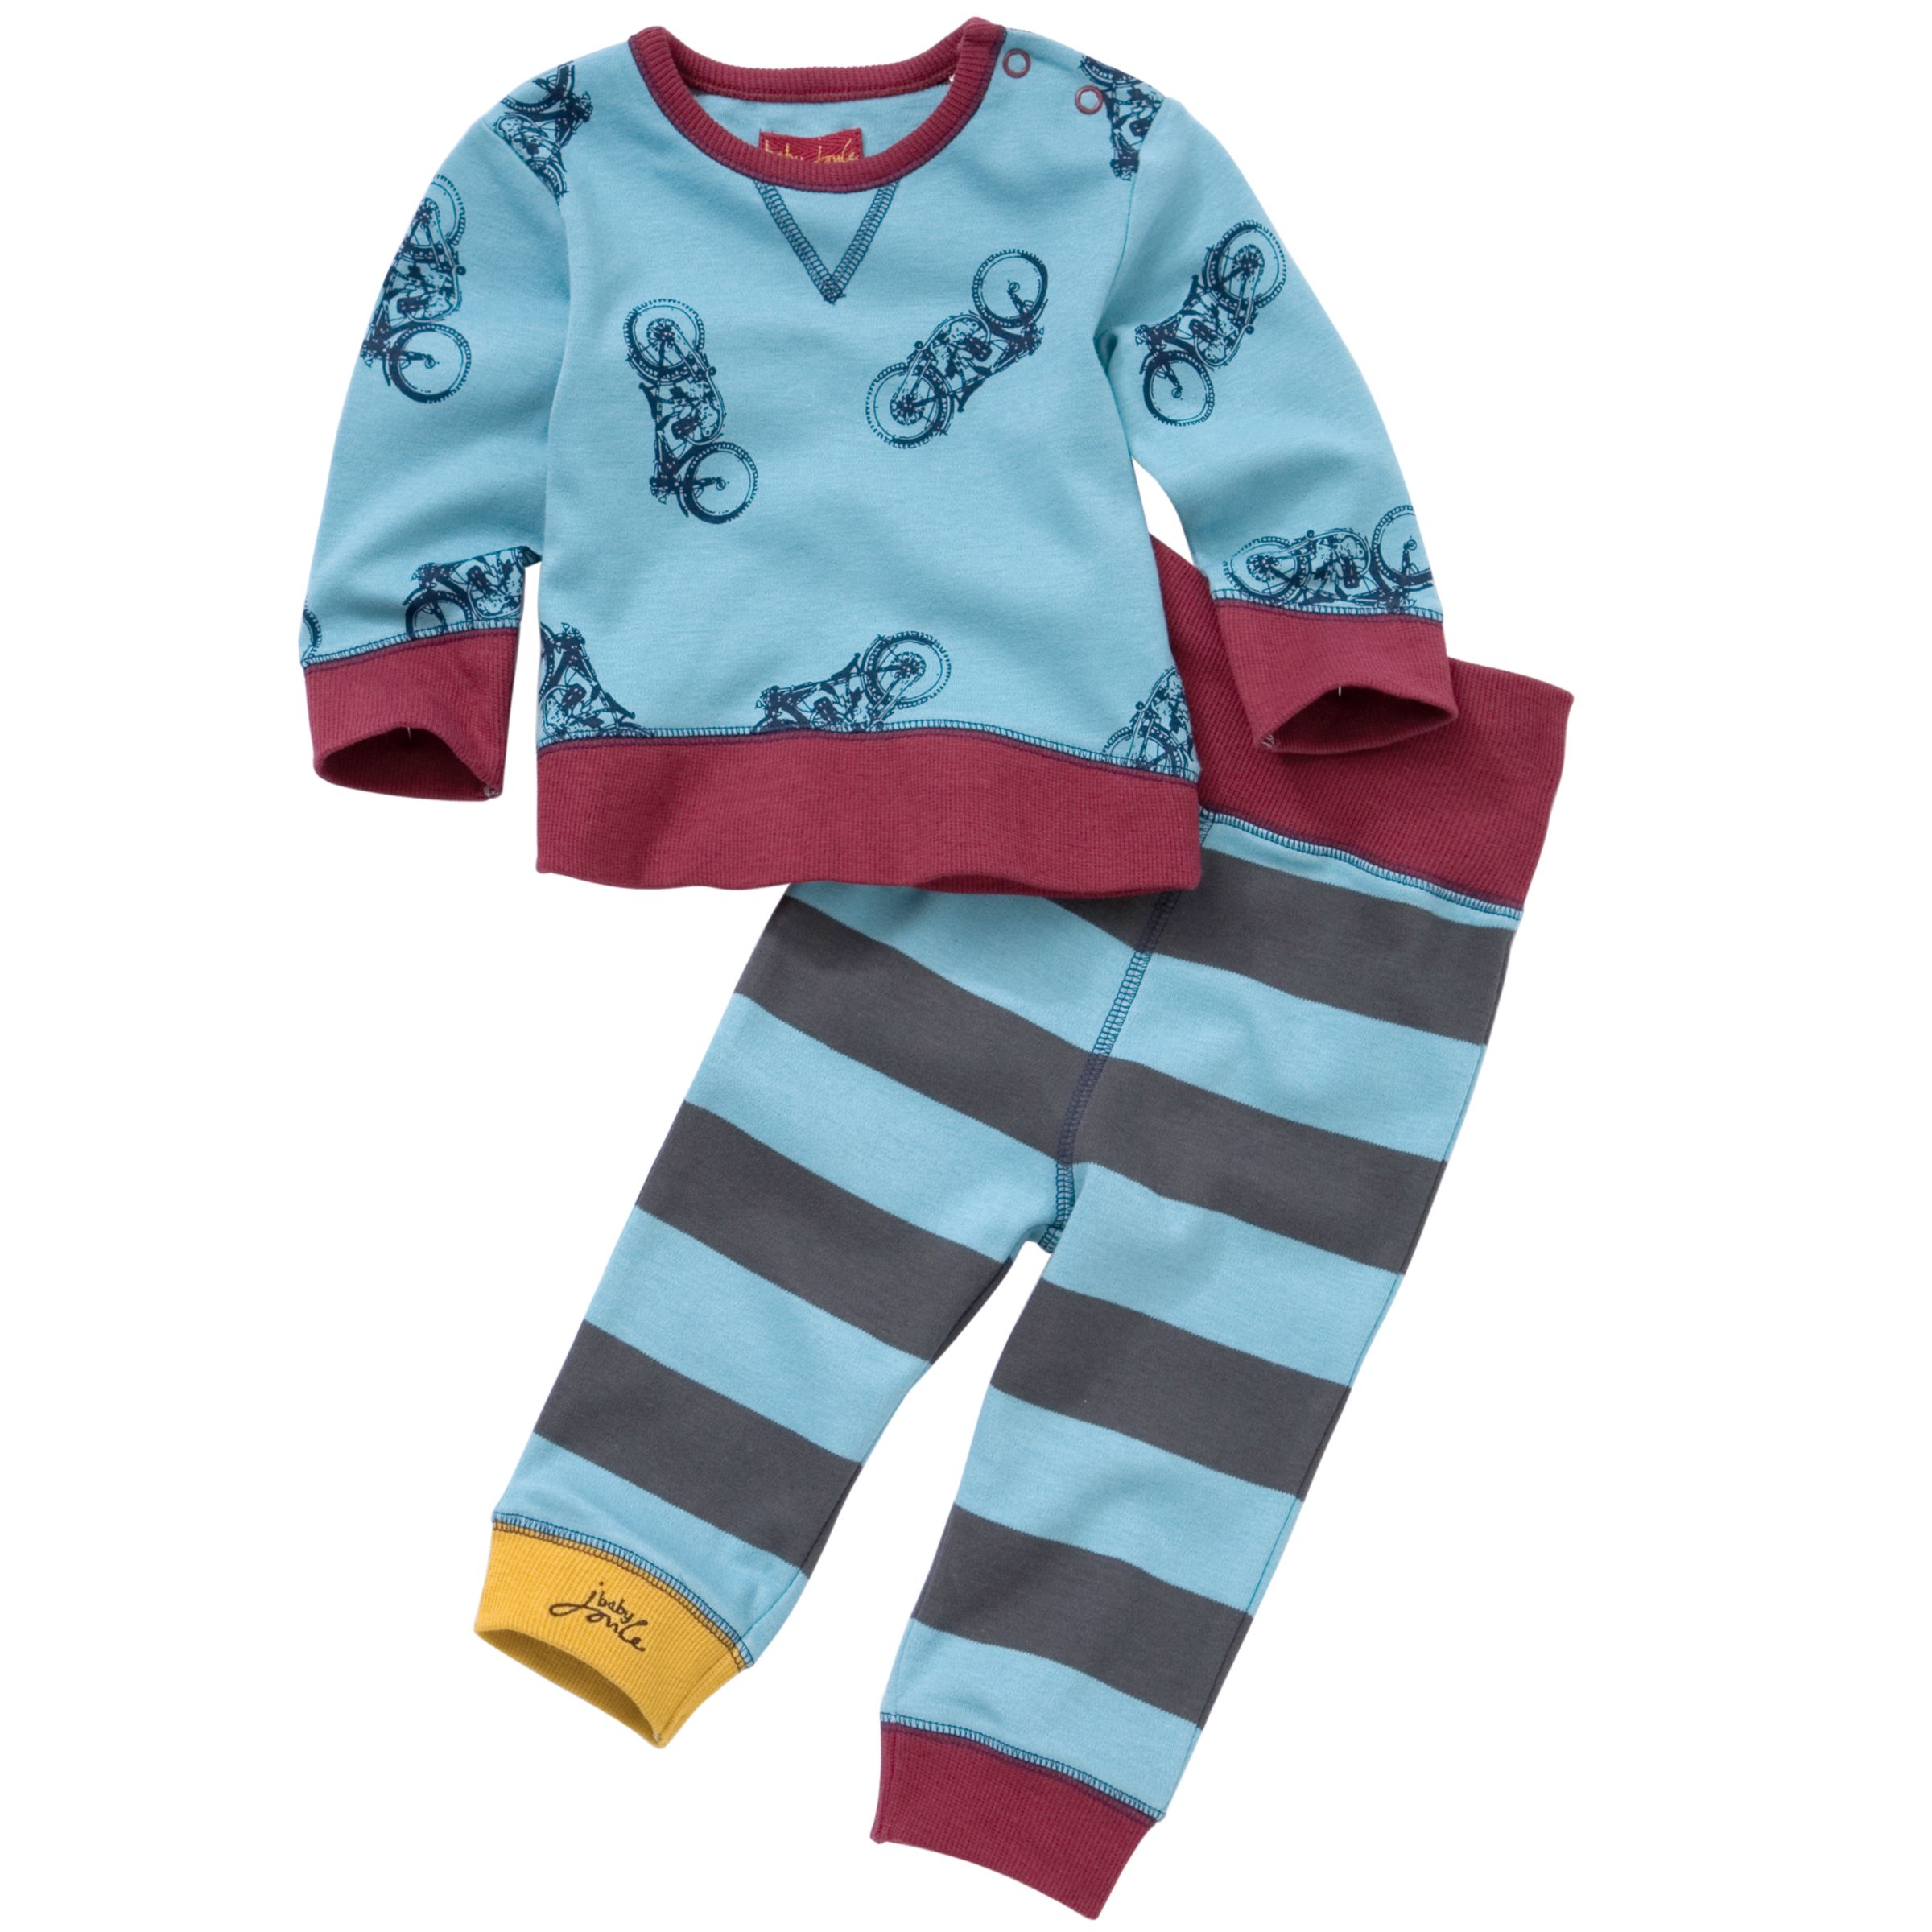 Baby Joules Bike T-Shirt and Trouser Set, Blue